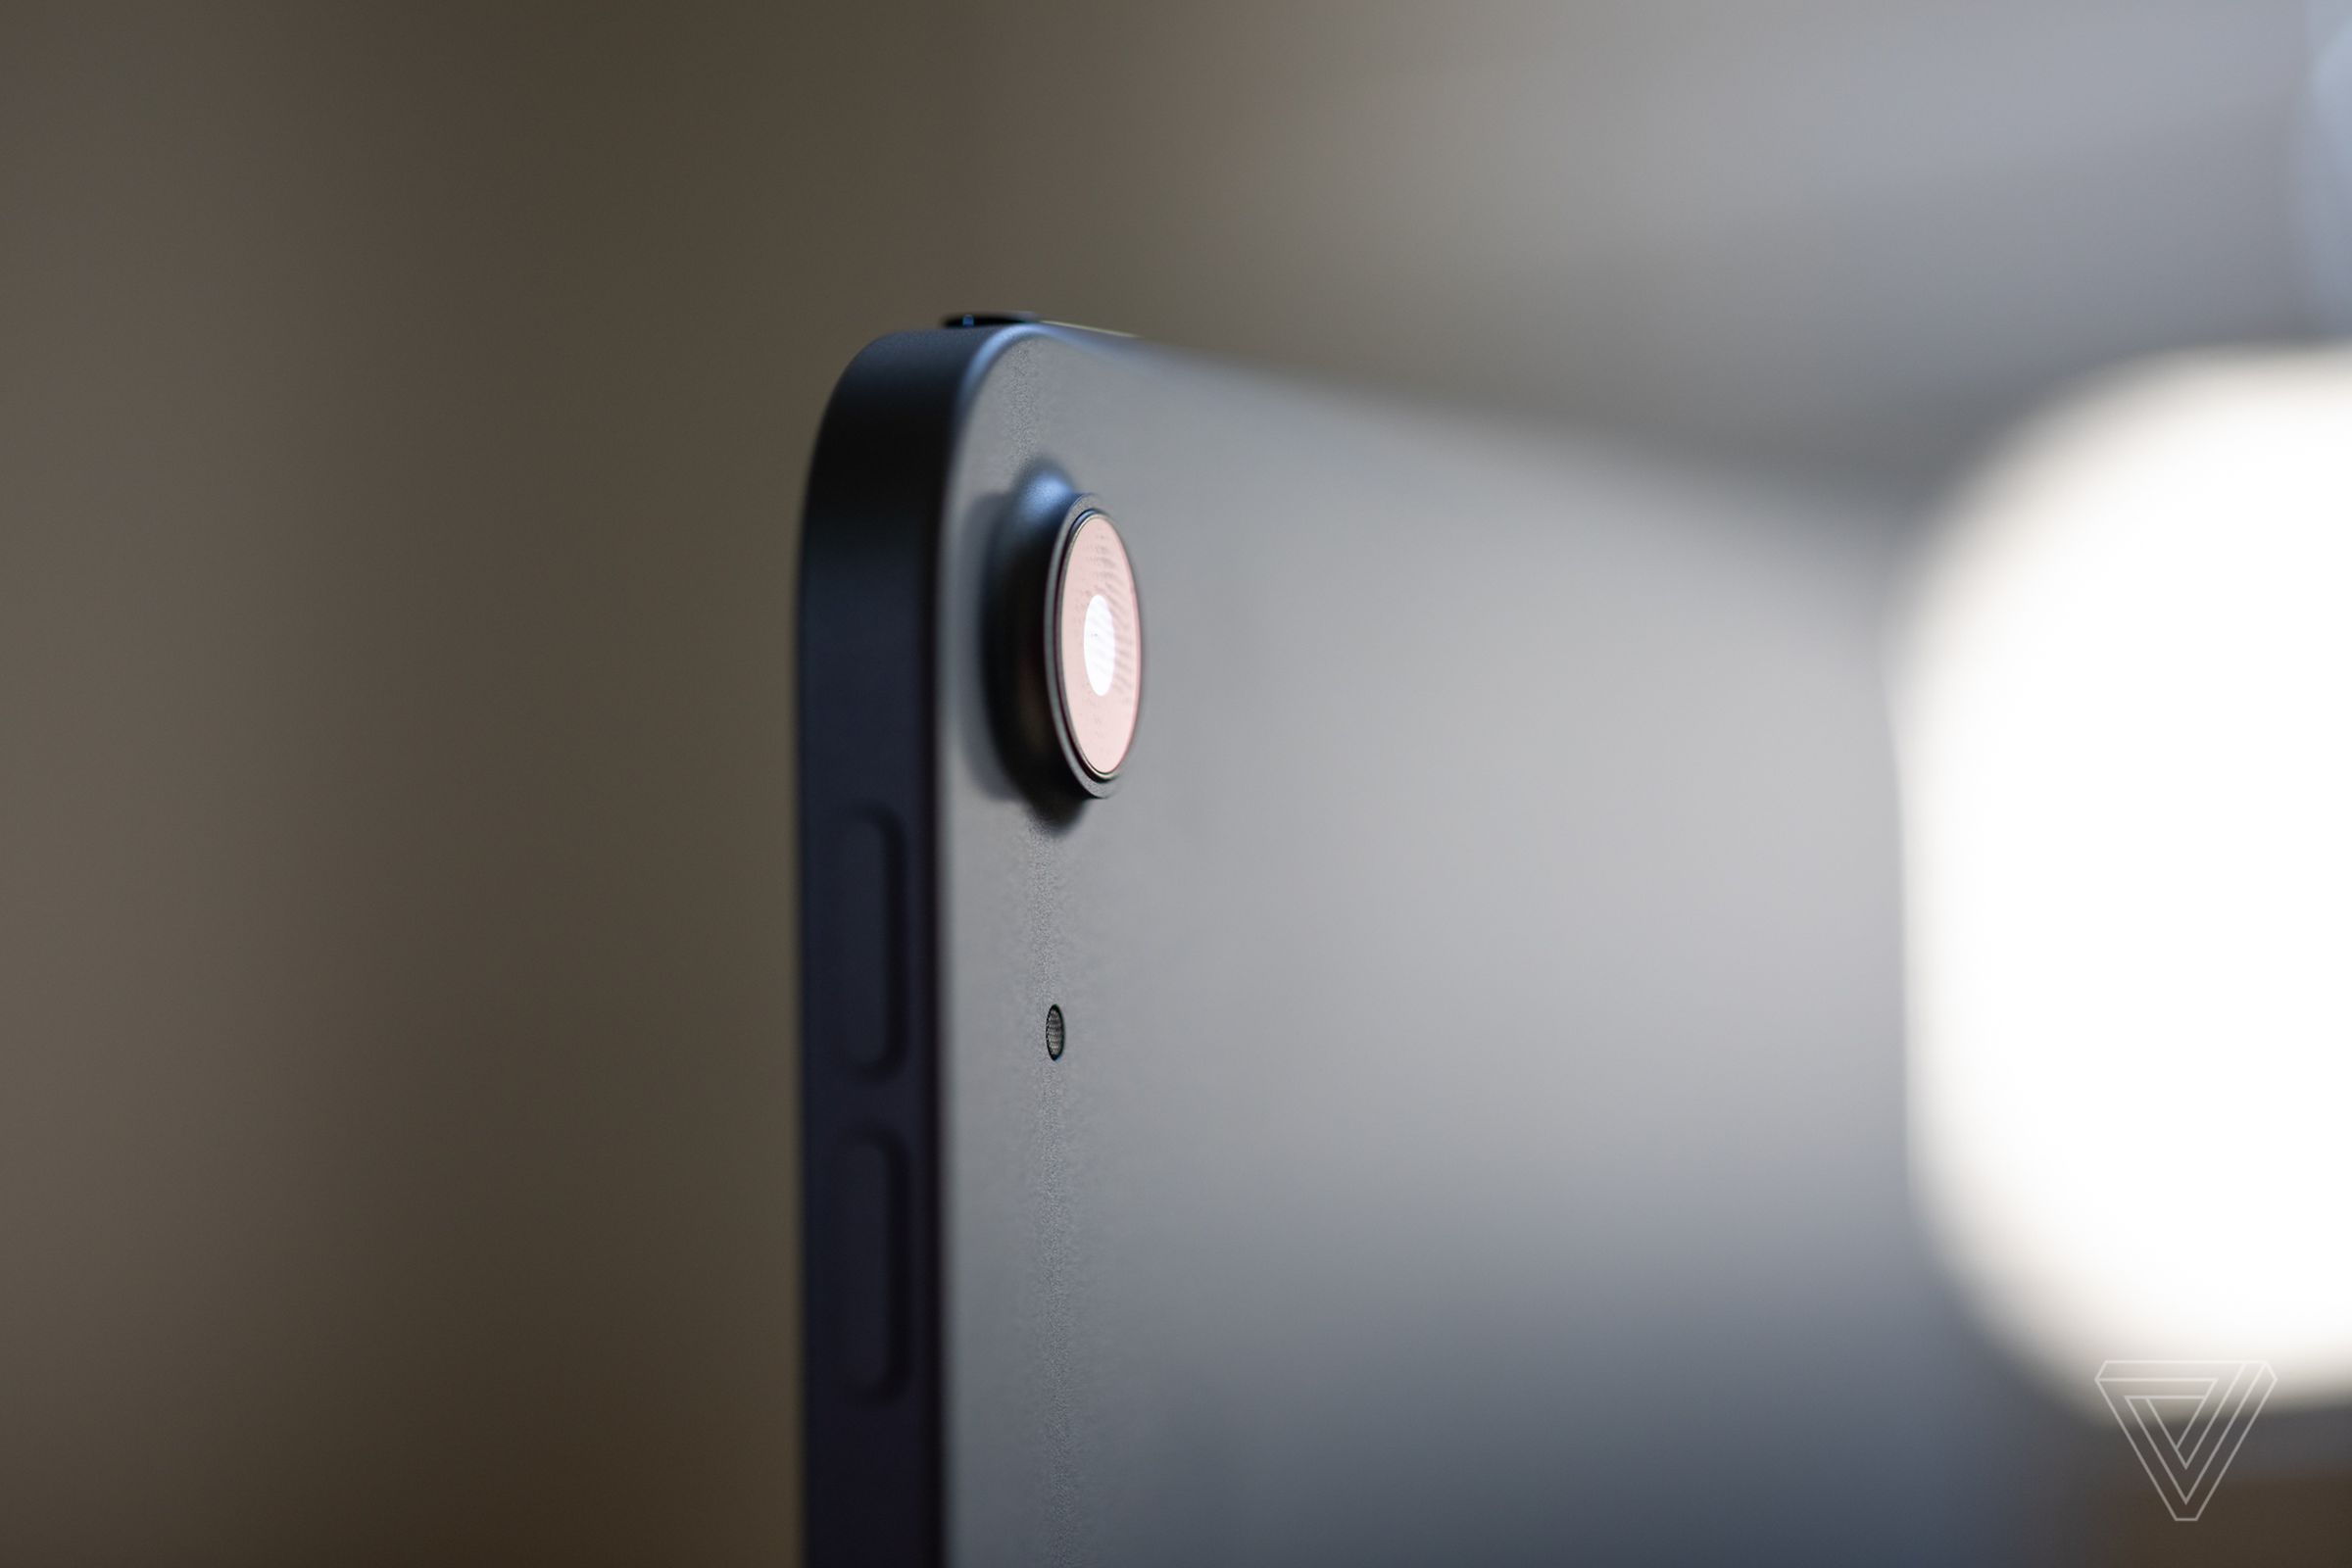 There’s a single 12-megapixel wide-angle camera on the back. It is fairly good, but shouldn’t drive your purchasing decision one way or the other.